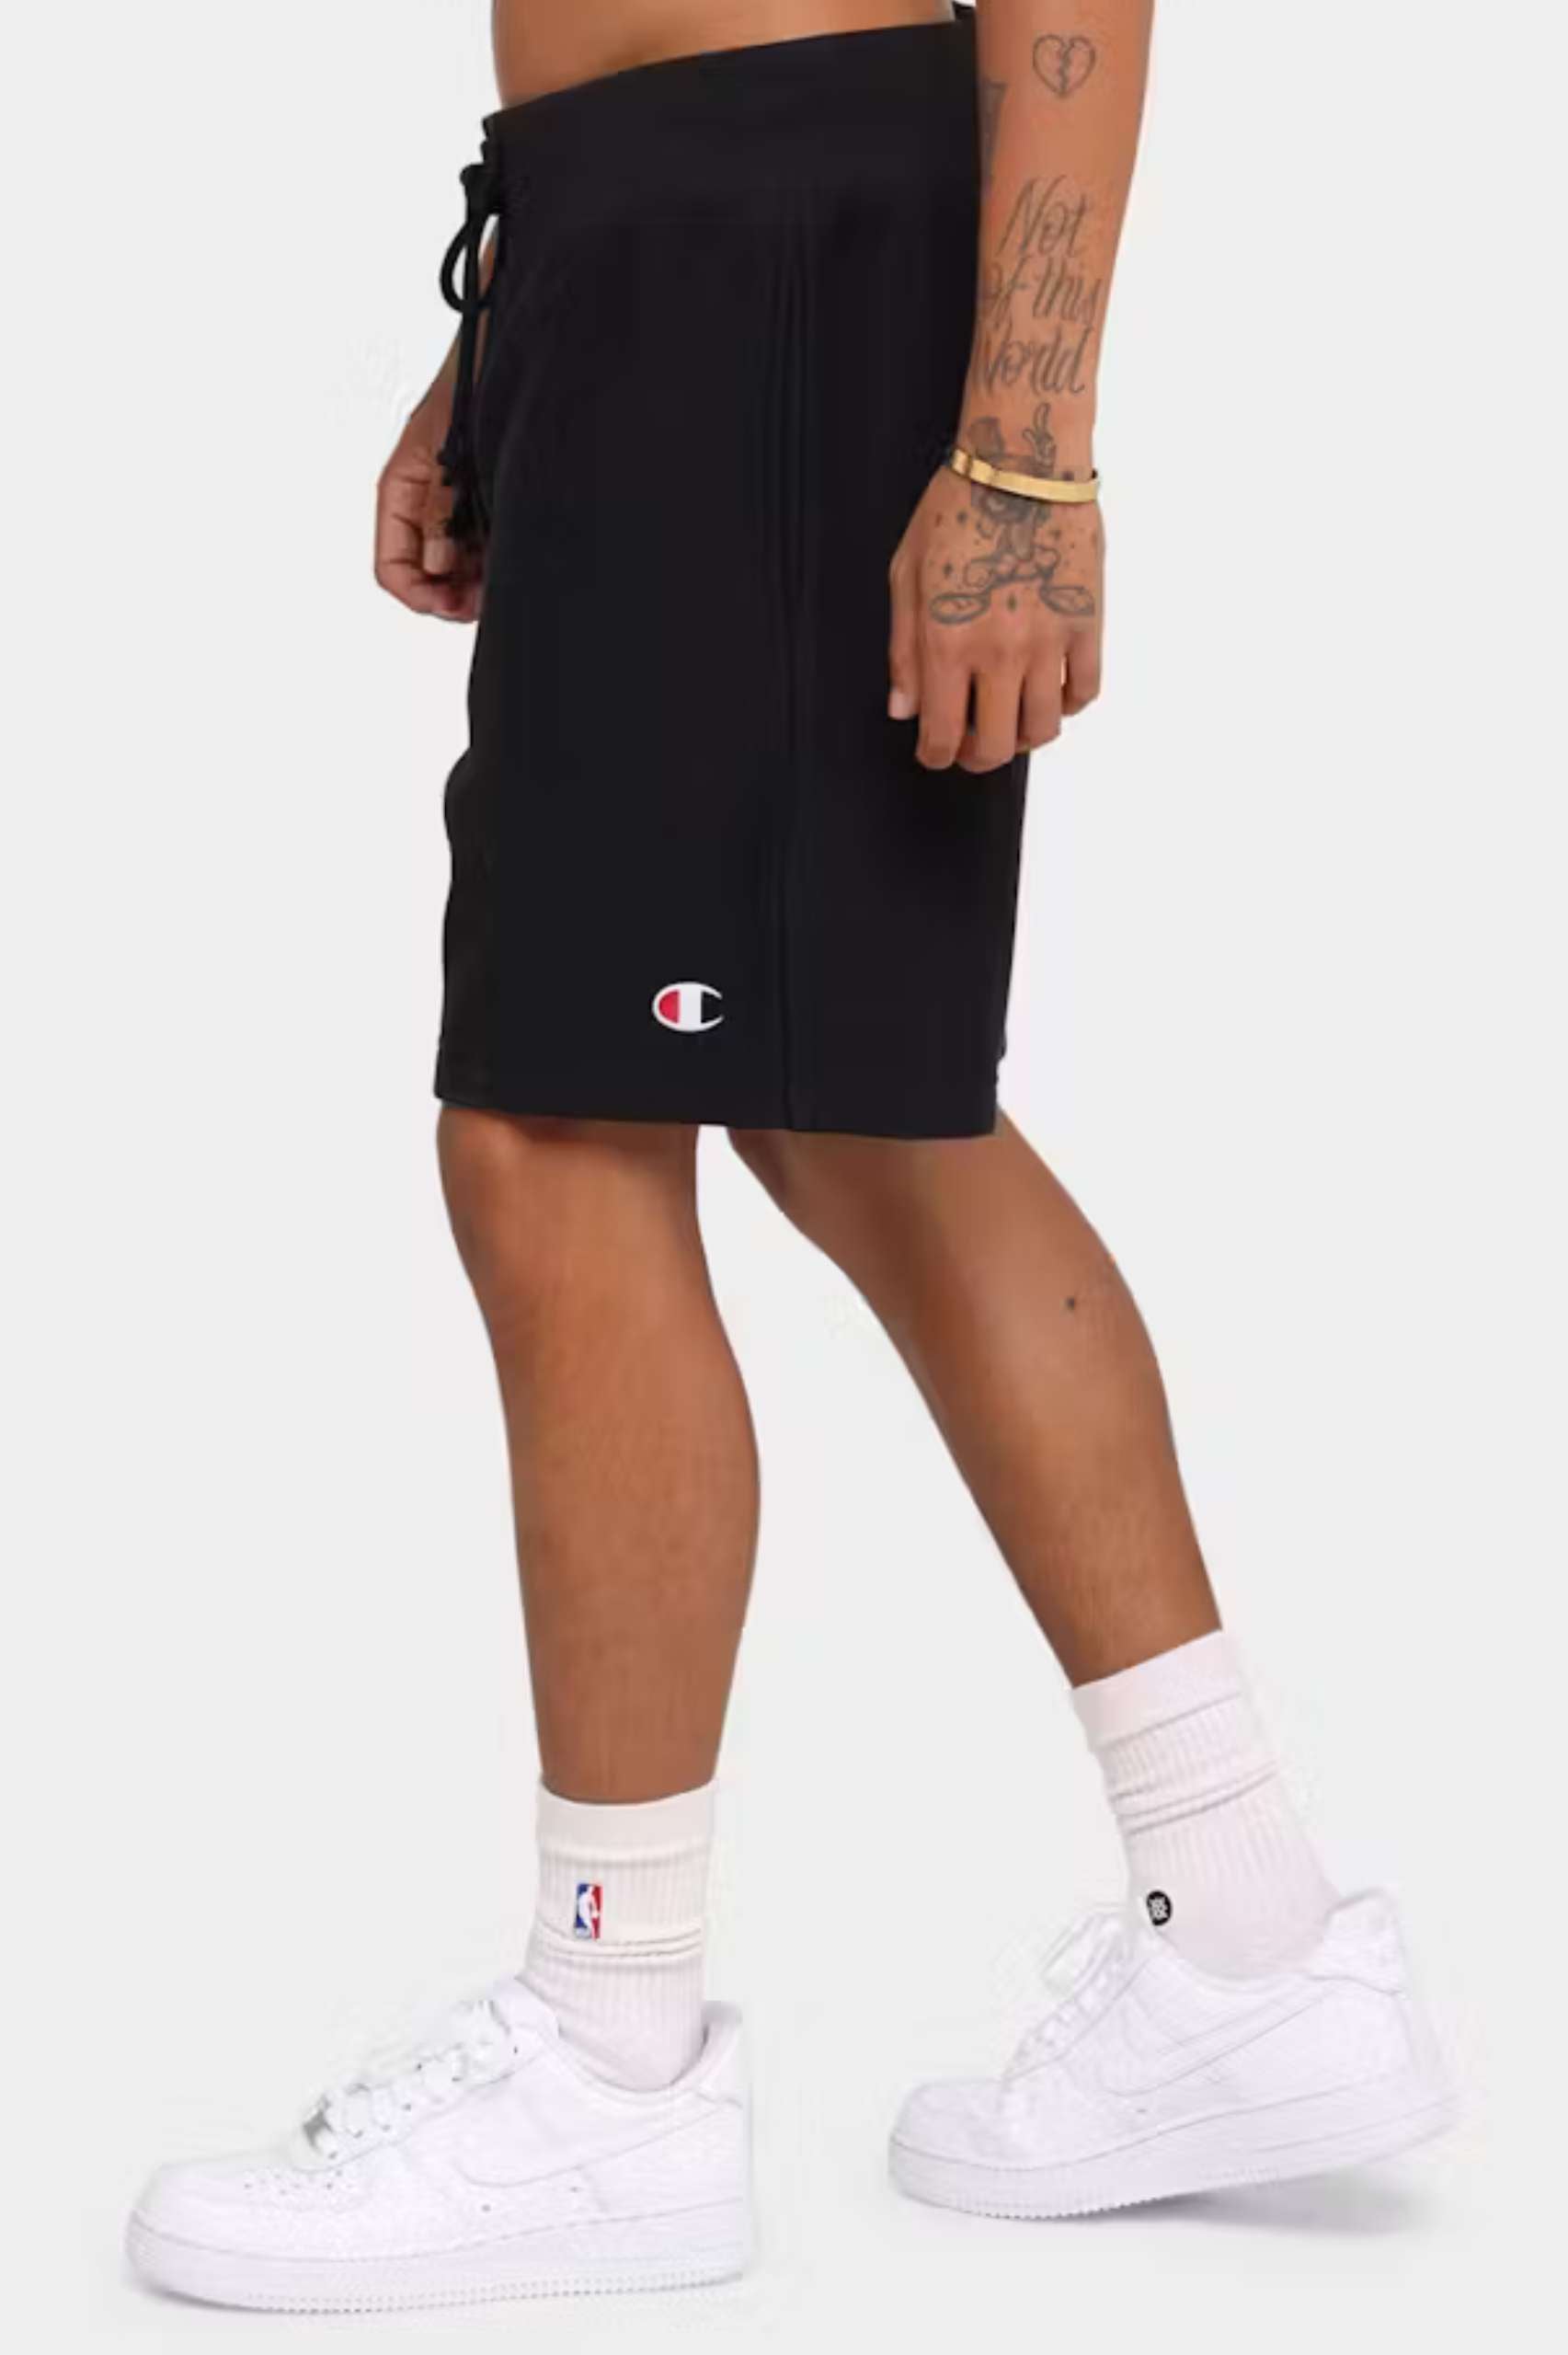 Champion Mens Reverse Weave Terry Short in Black